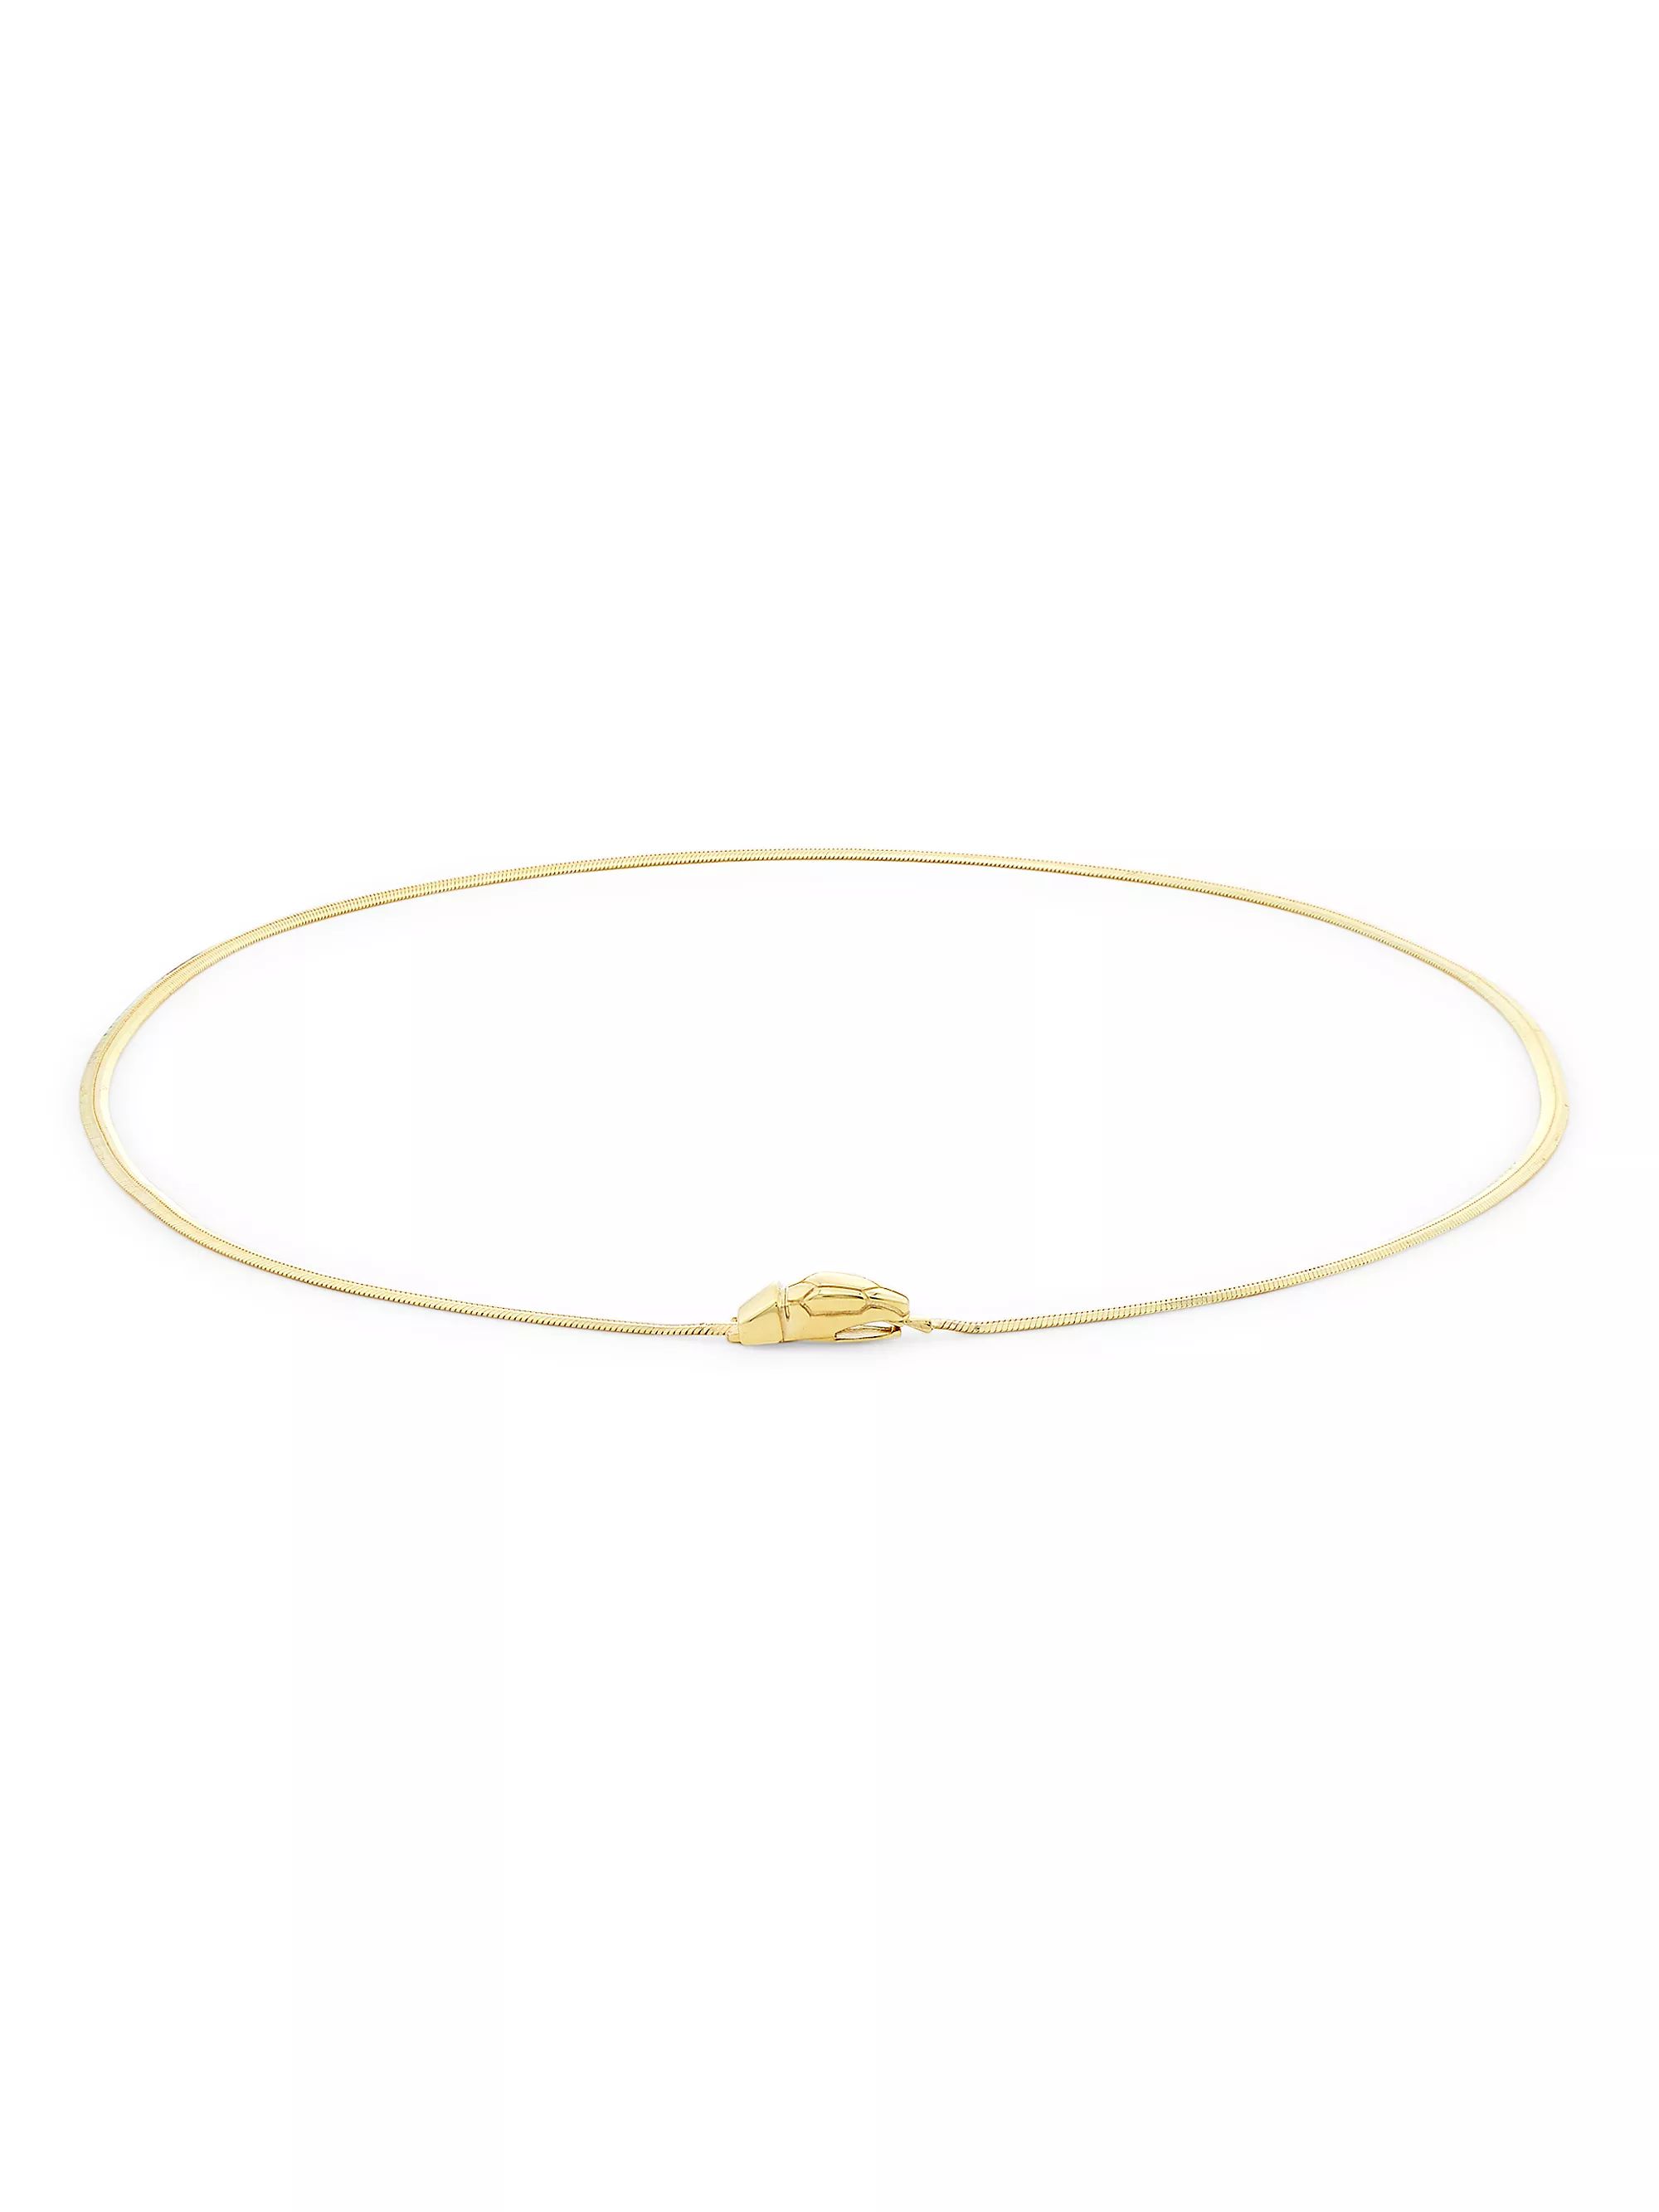 14K Yellow Gold Snake Chain Necklace | Saks Fifth Avenue